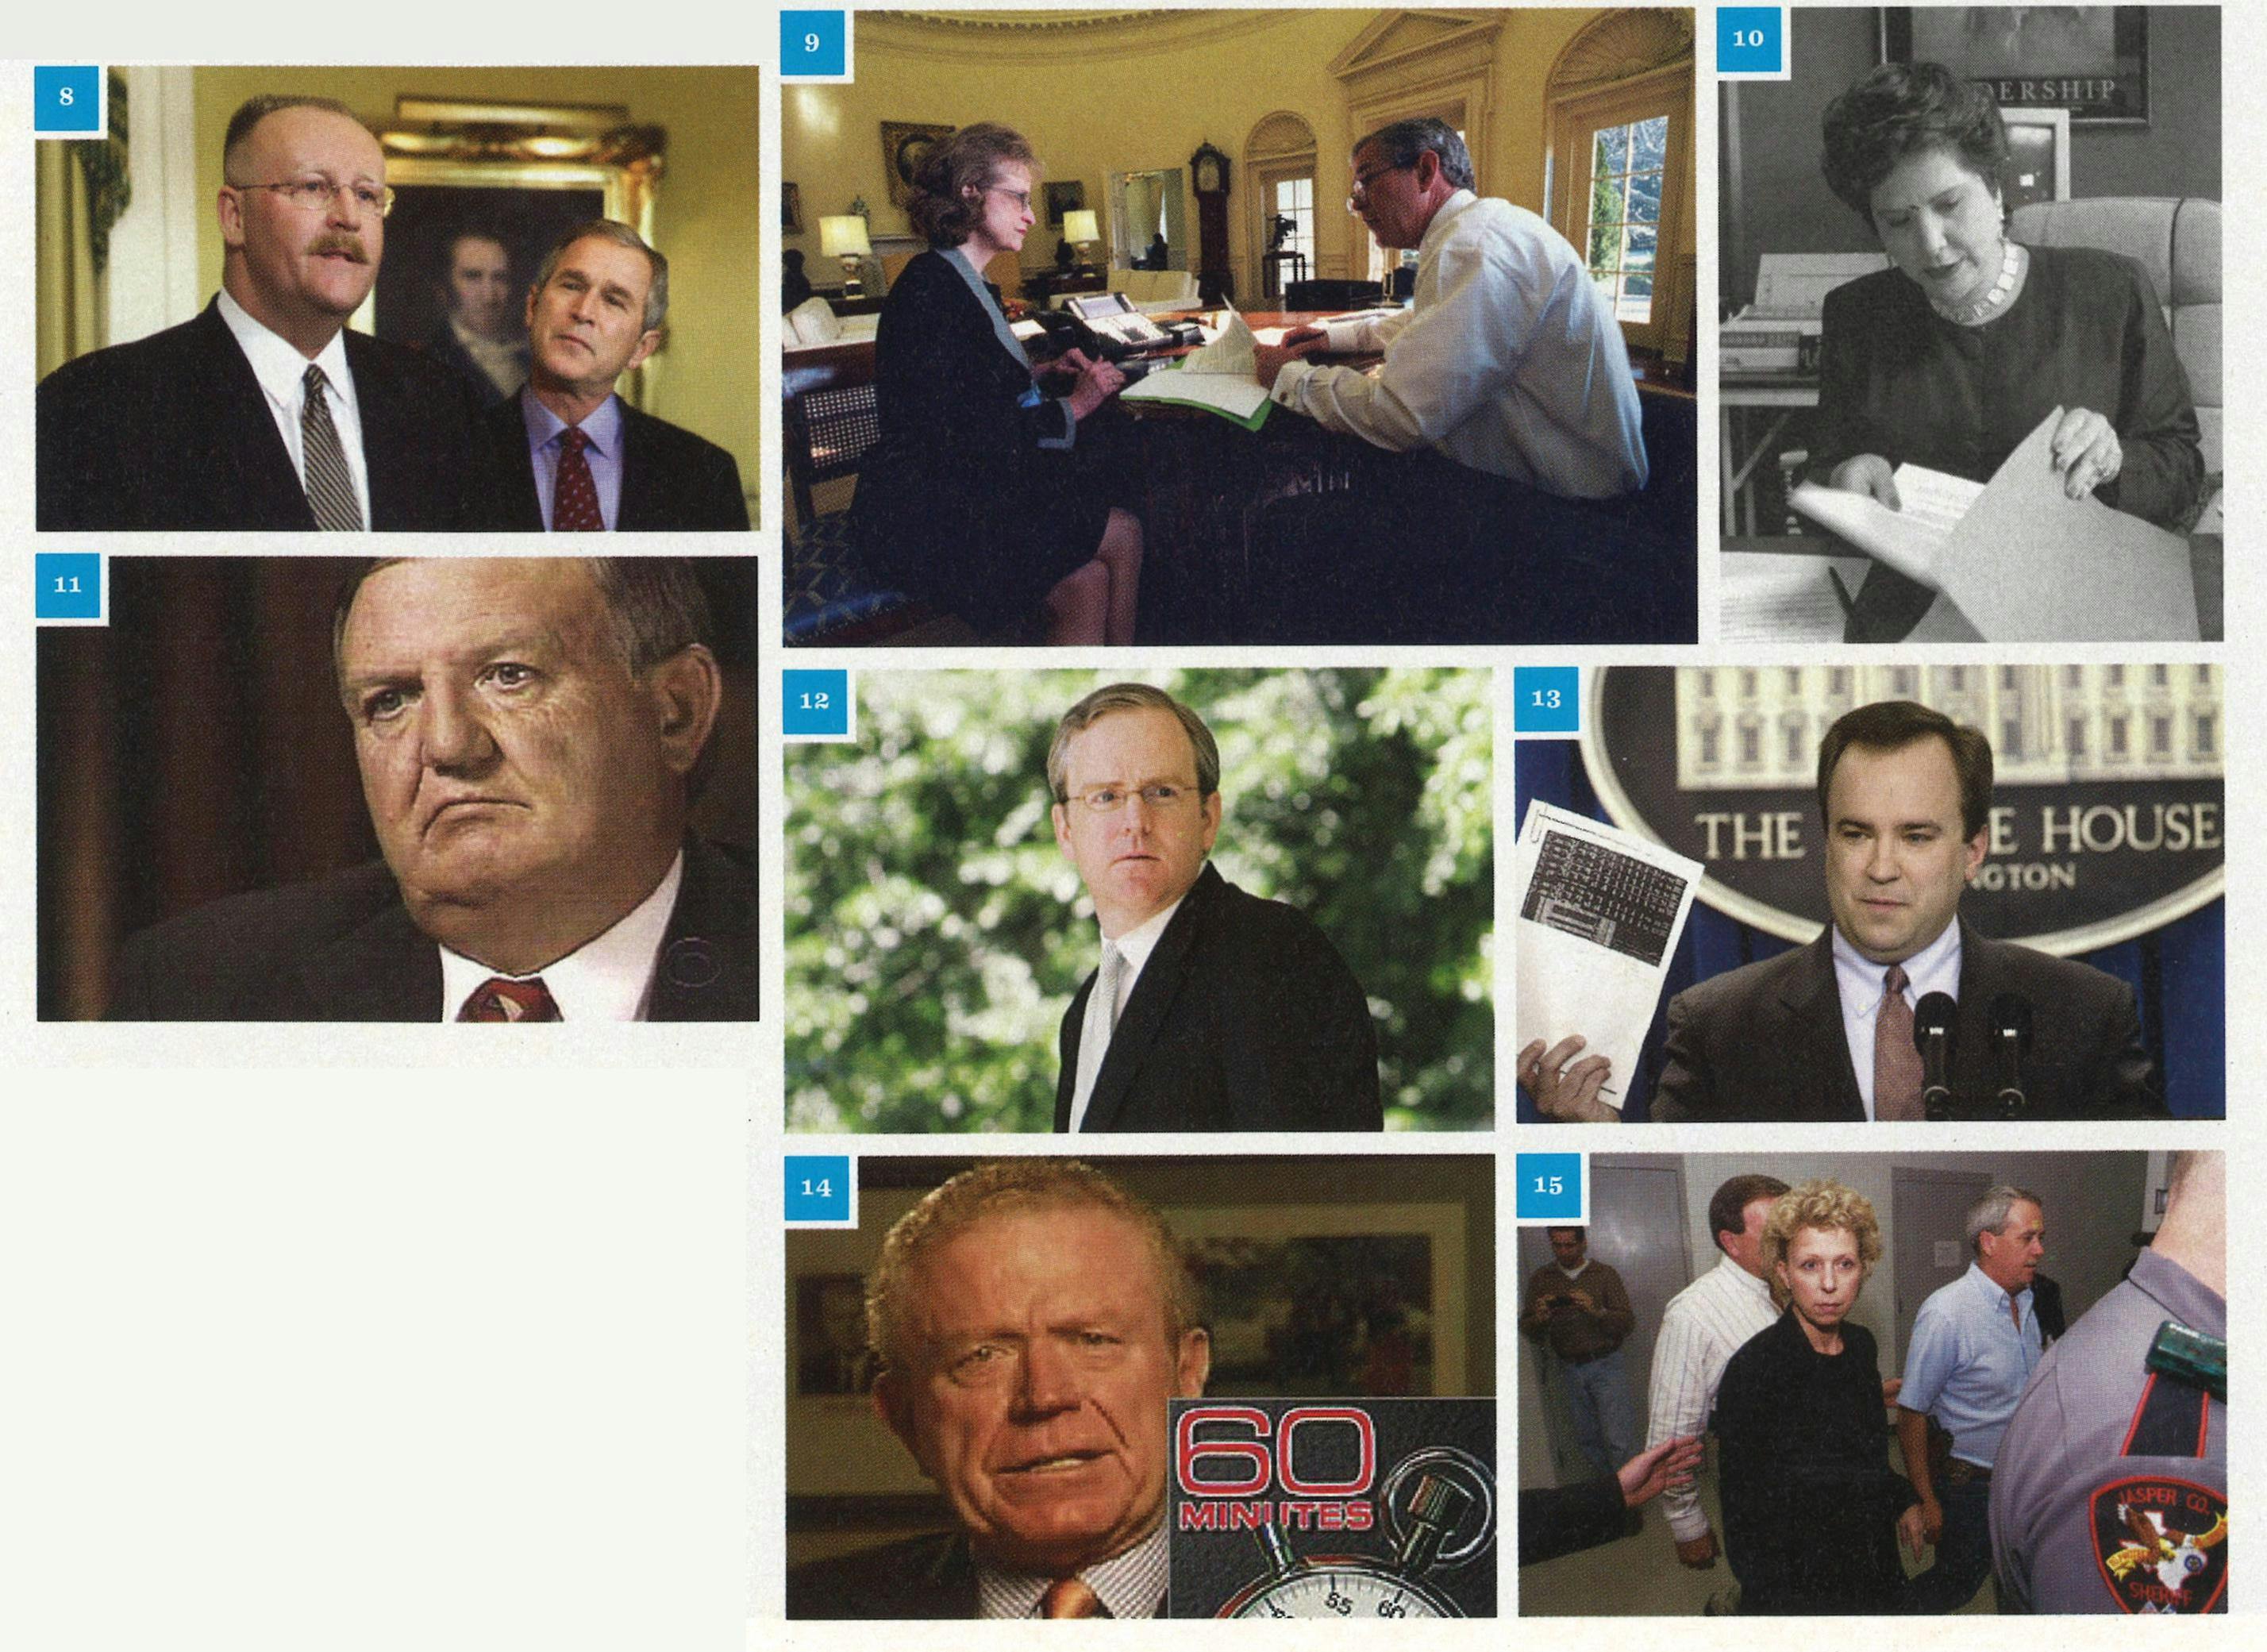 8. Bush and Joe Allbaugh in 2001. 9. Bush in the Oval Office with Harriet Miers in 2001. 10. Nora Linares at the Texas Lottery Commission in 1993. 11. Bill Burkett. 13. Dan Bartlett at the White House in 2007. 13. Scott McClellan presenting new Bush military documents in 2004. 14. Barnes on 60 Minutes in 2004. 15. Mary Mapes in 1999.